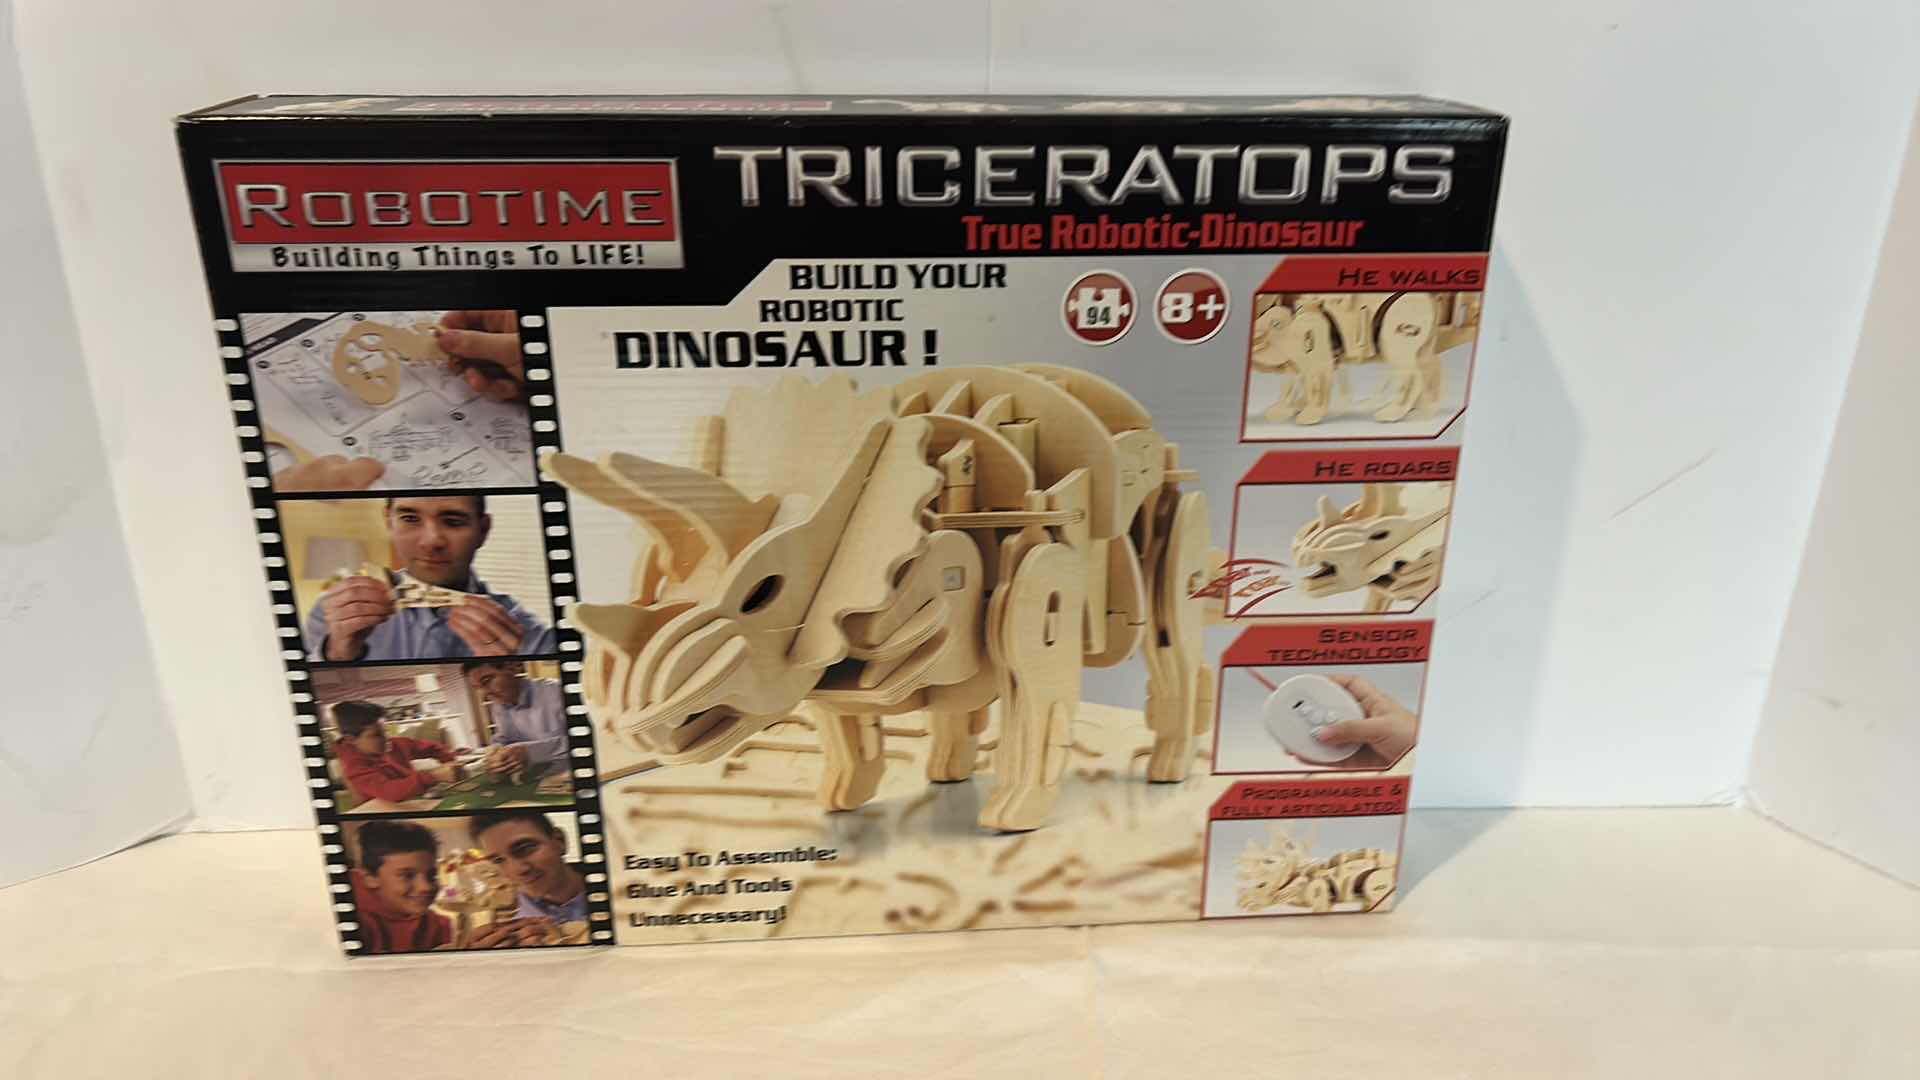 Photo 2 of 2 - NEW IN BOX ROBOTIME TRICERATOPS ROBOTIC DONASOURS